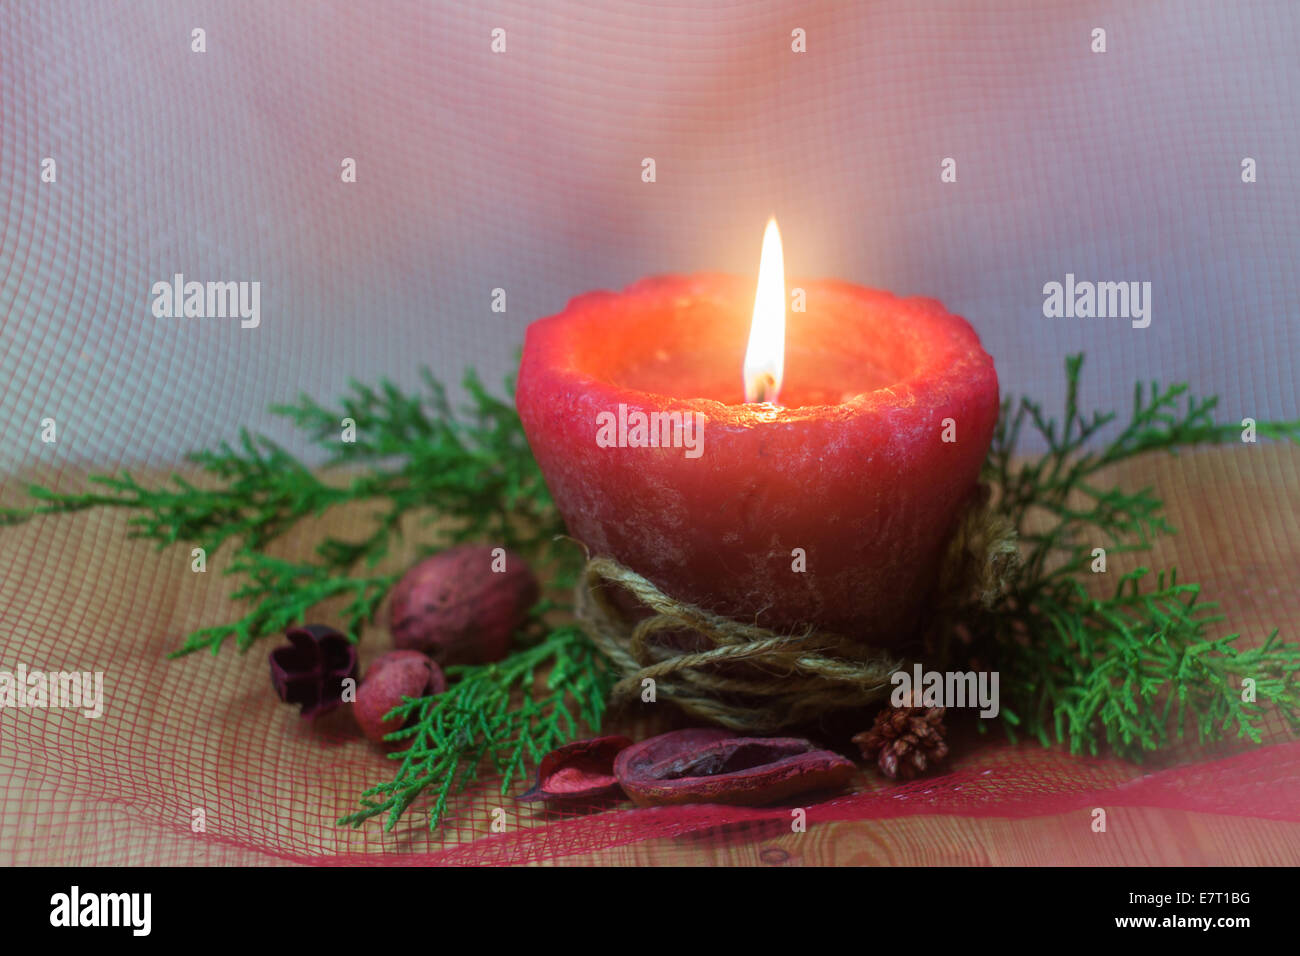 Christmas candle flaming red 'copy space' pine branch Stock Photo